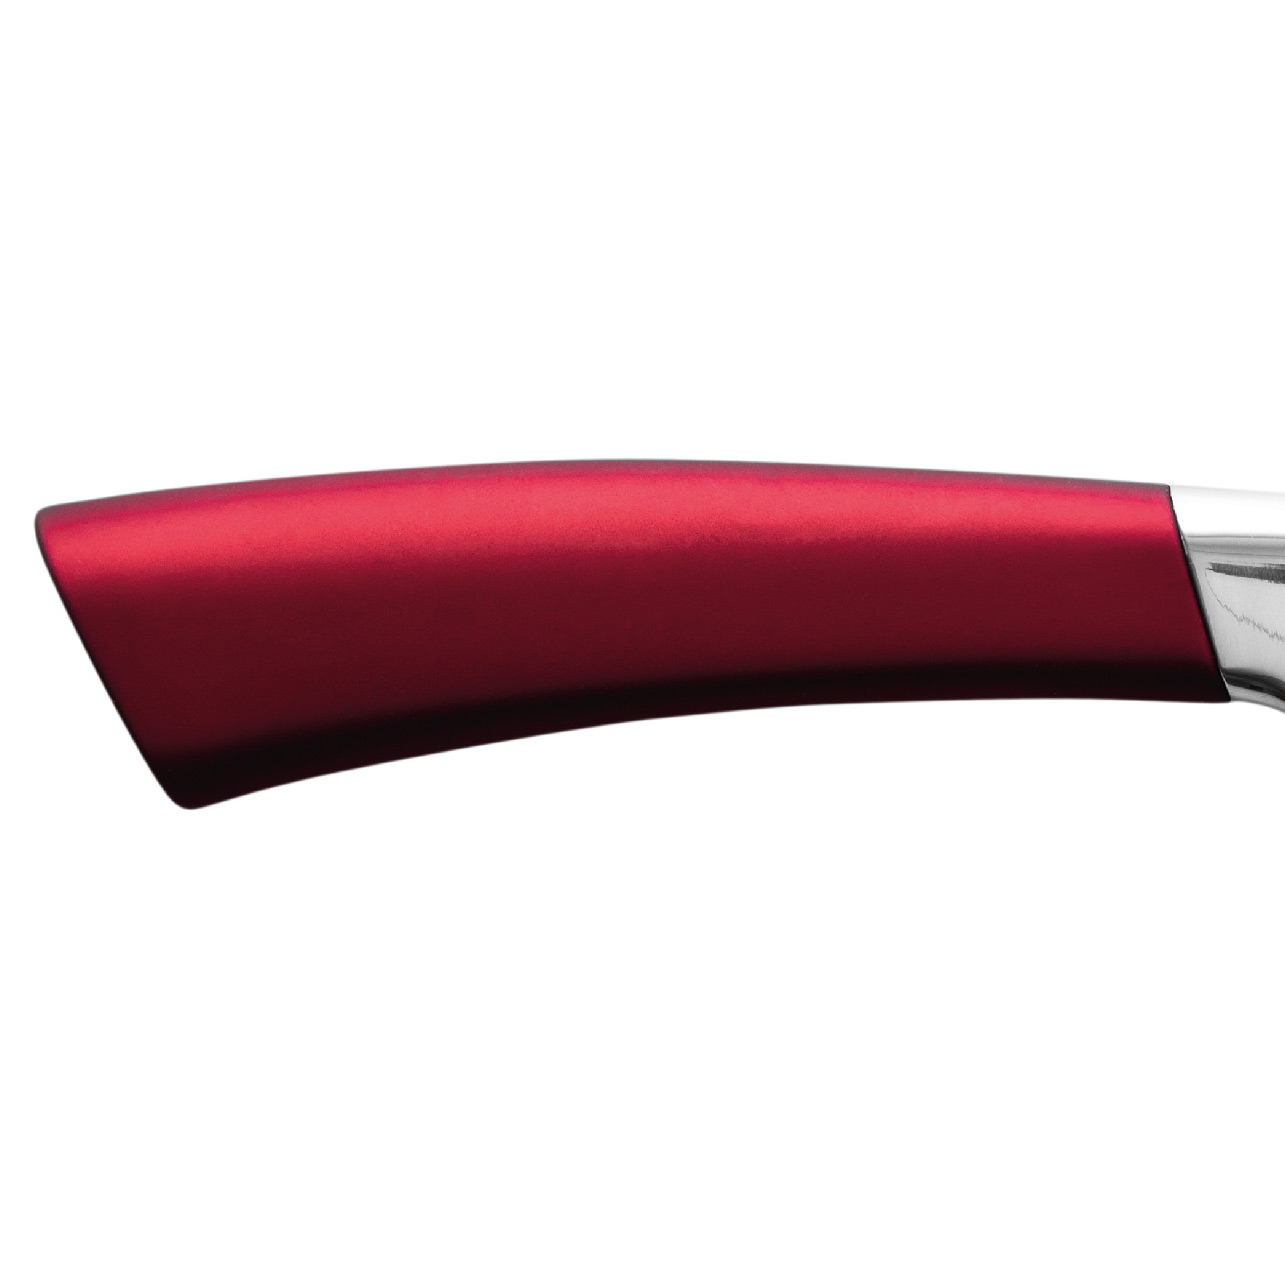 REEH ROUGE by CHROMA Santoku 20 cm RR-04 Griff